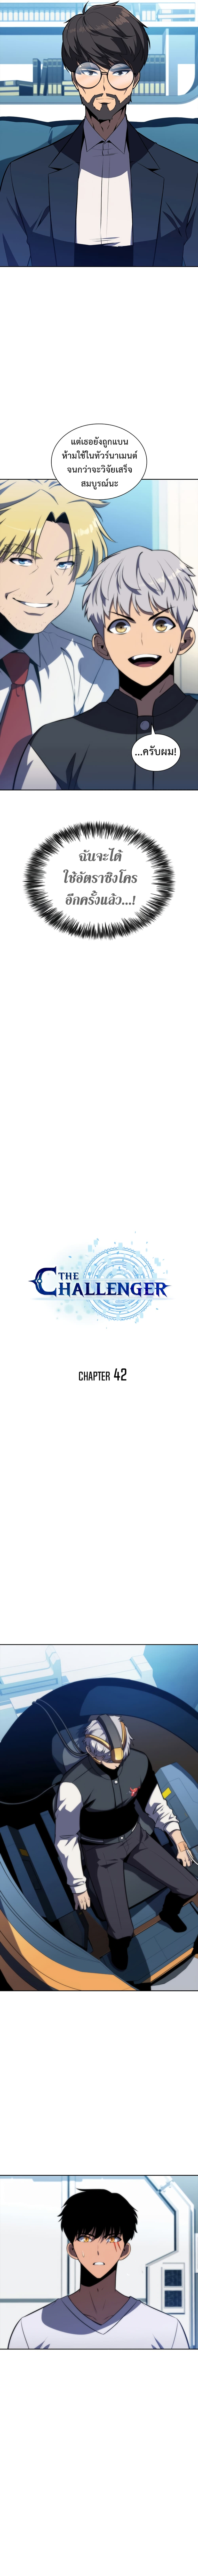 The Challenger 42-42